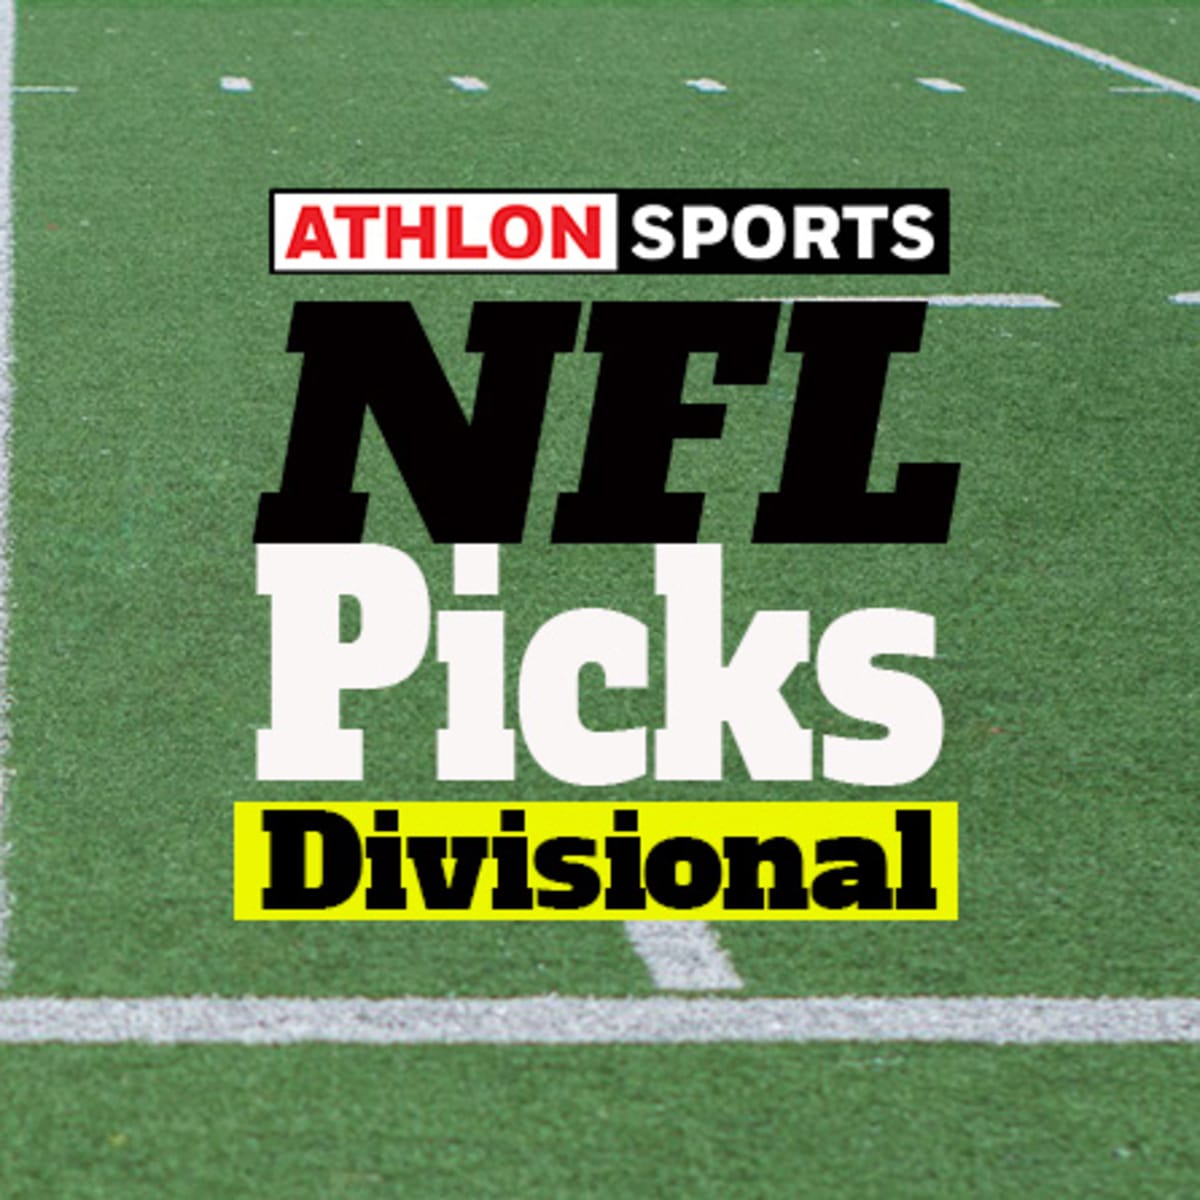 2022 NFL picks, score predictions for Divisional Round